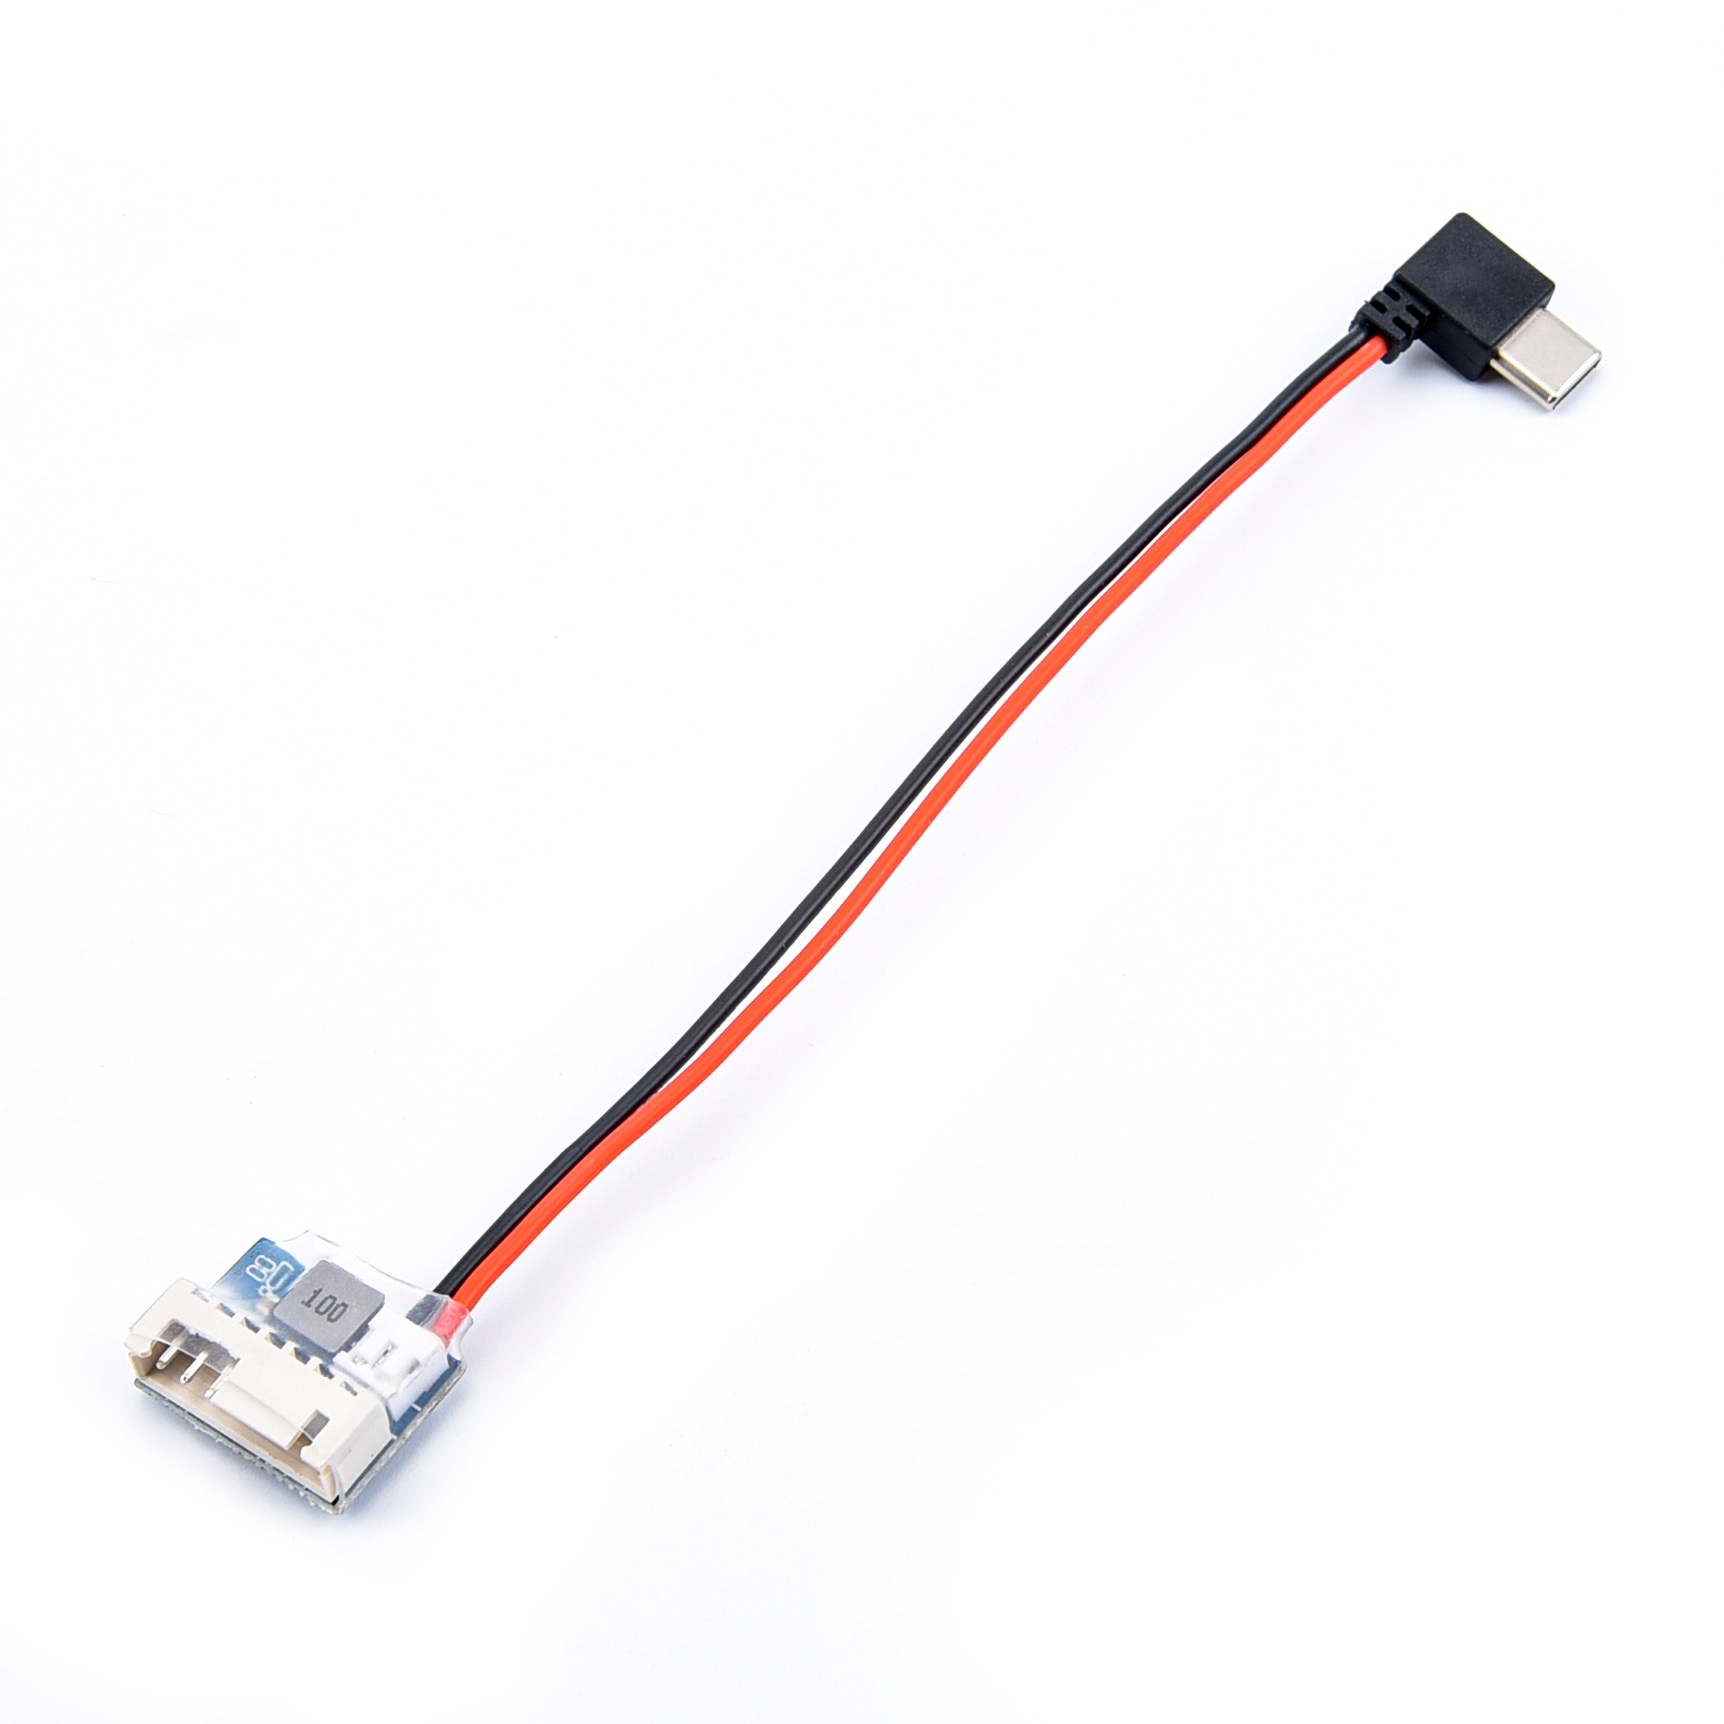 GoPro Balance Plug Power Cable Type C to 5V Charging Cable for GoPro Hero 6/7/8/9